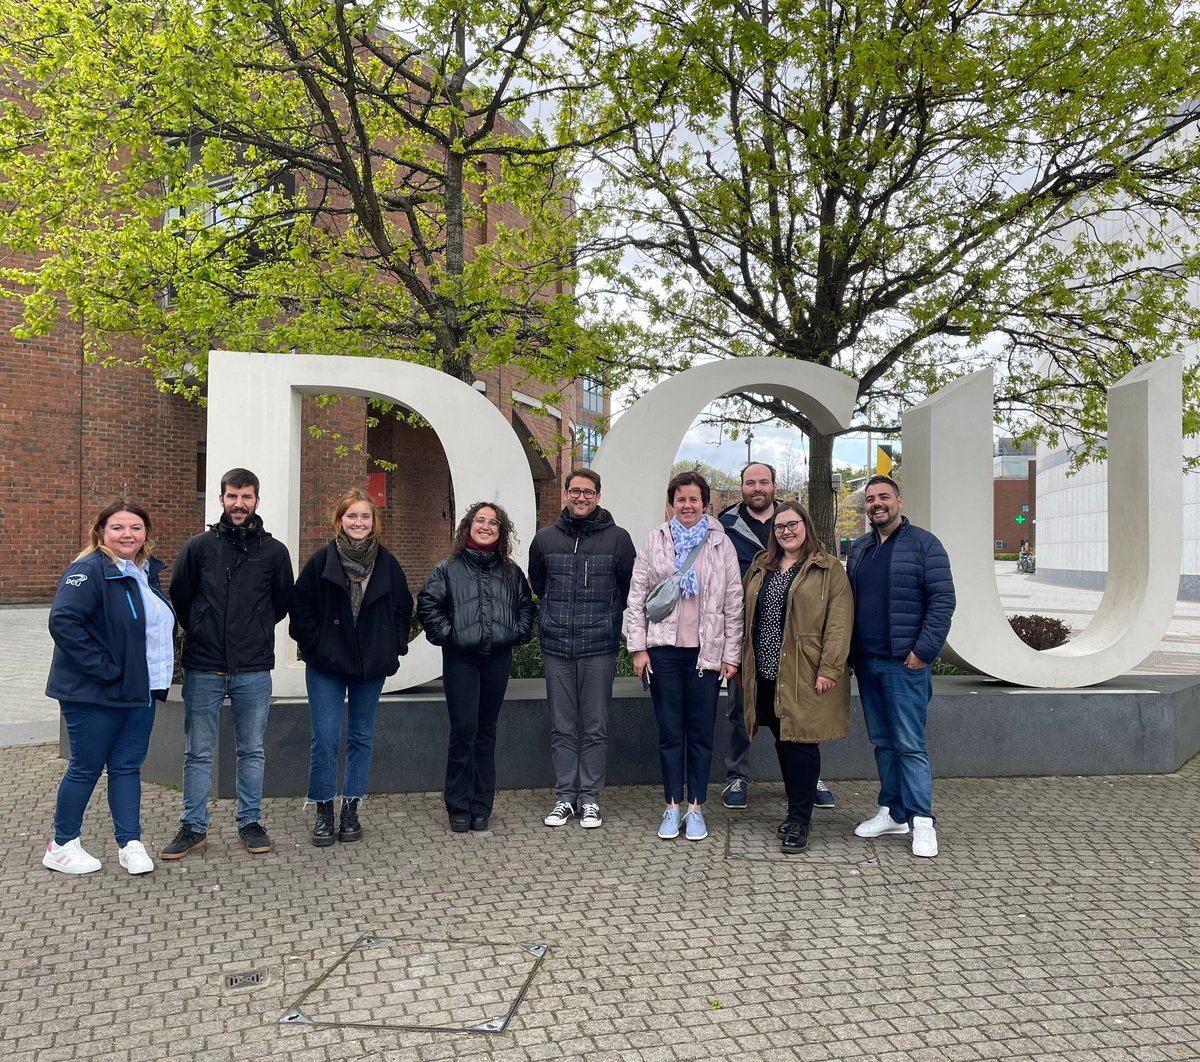 Last week @DCUWater hosted @ECIUniversities partners for our @citizenarenas projects. Researchers from @ktuspace @ICTA_UAB @INSAToulouse @UnivAveiro got a @DCU campus tour from Ruth! 
#EngagedResearch #SmartER 
@DaireKeogh @DCU_Research  @DCUFSH @hegarty_susan